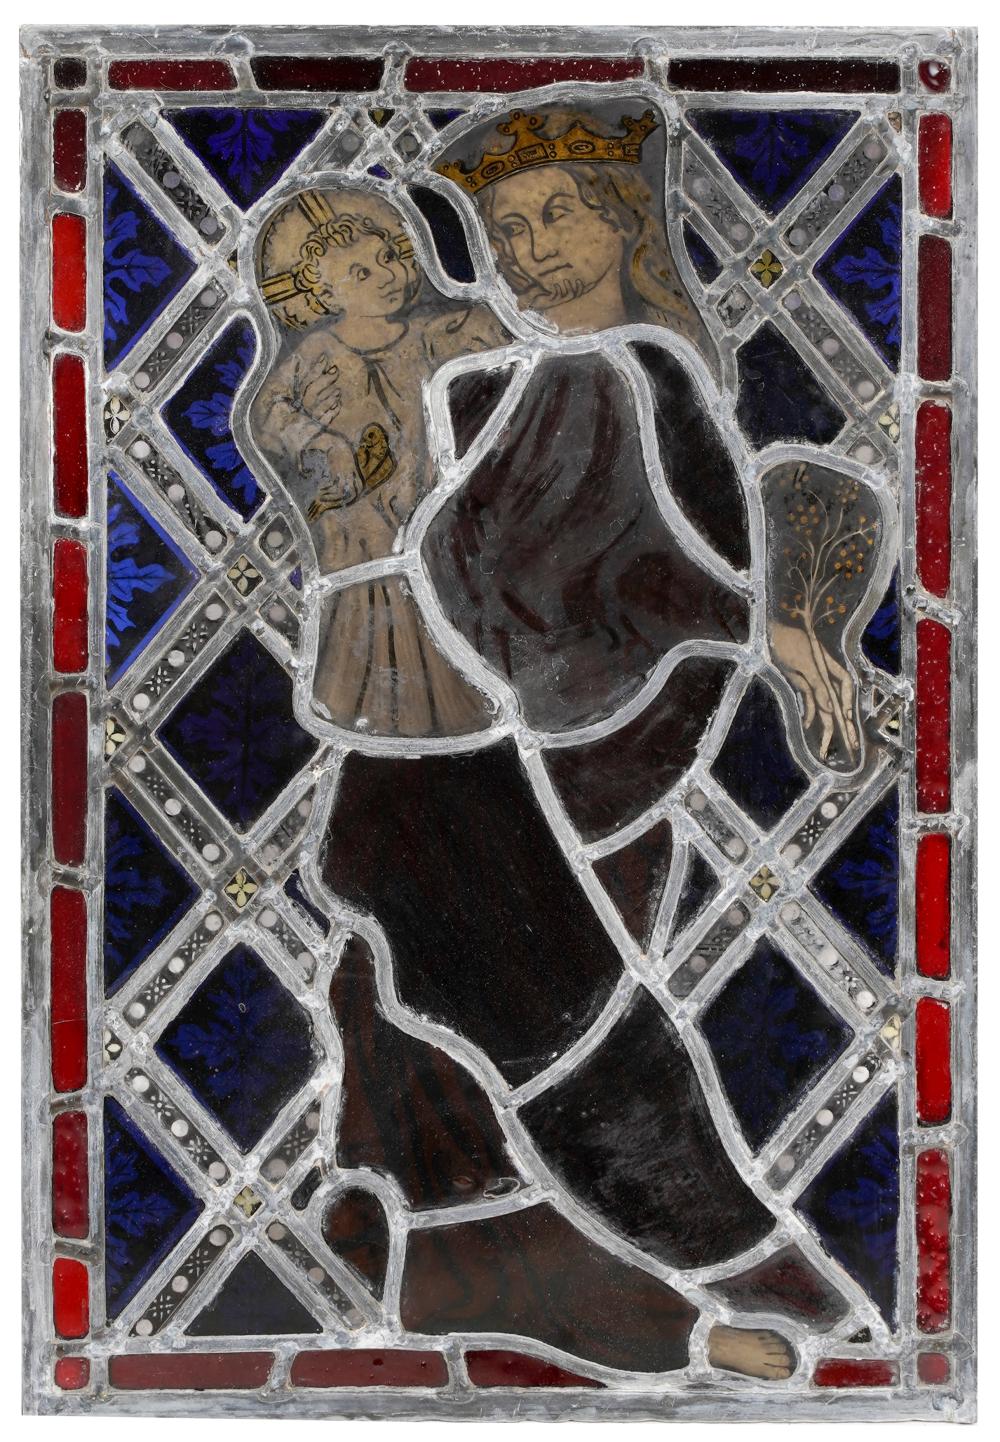 STAINED GLASS PANELdepicting the Virgin